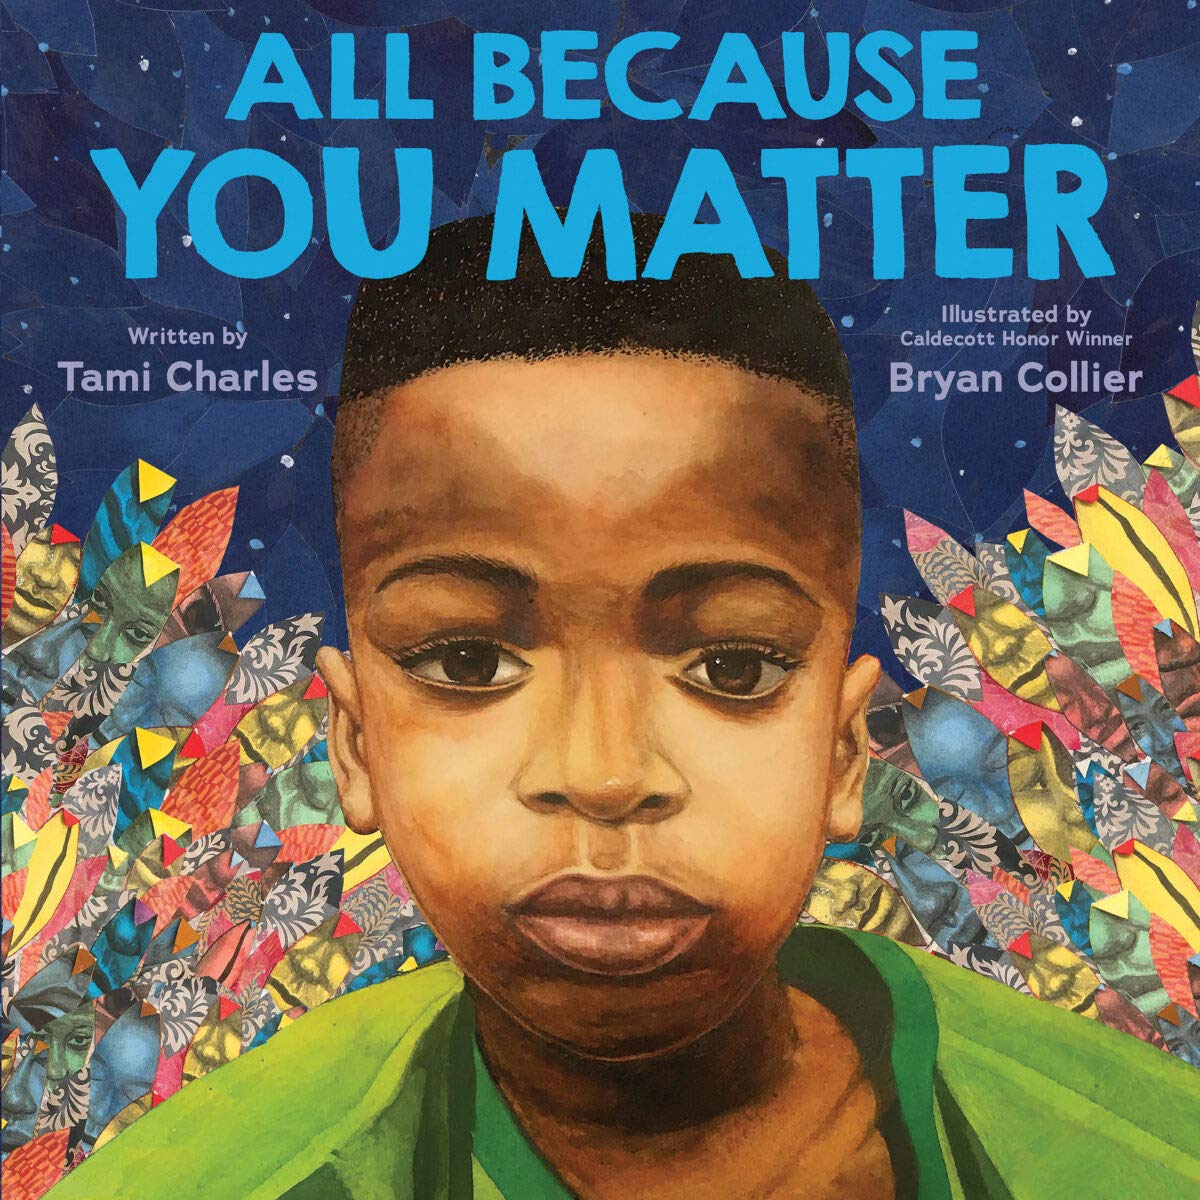 The cover to "All Because You Matter" by Tami Charles. A Black boy looks directly to the reader. His background includes the faces of many other Black people.